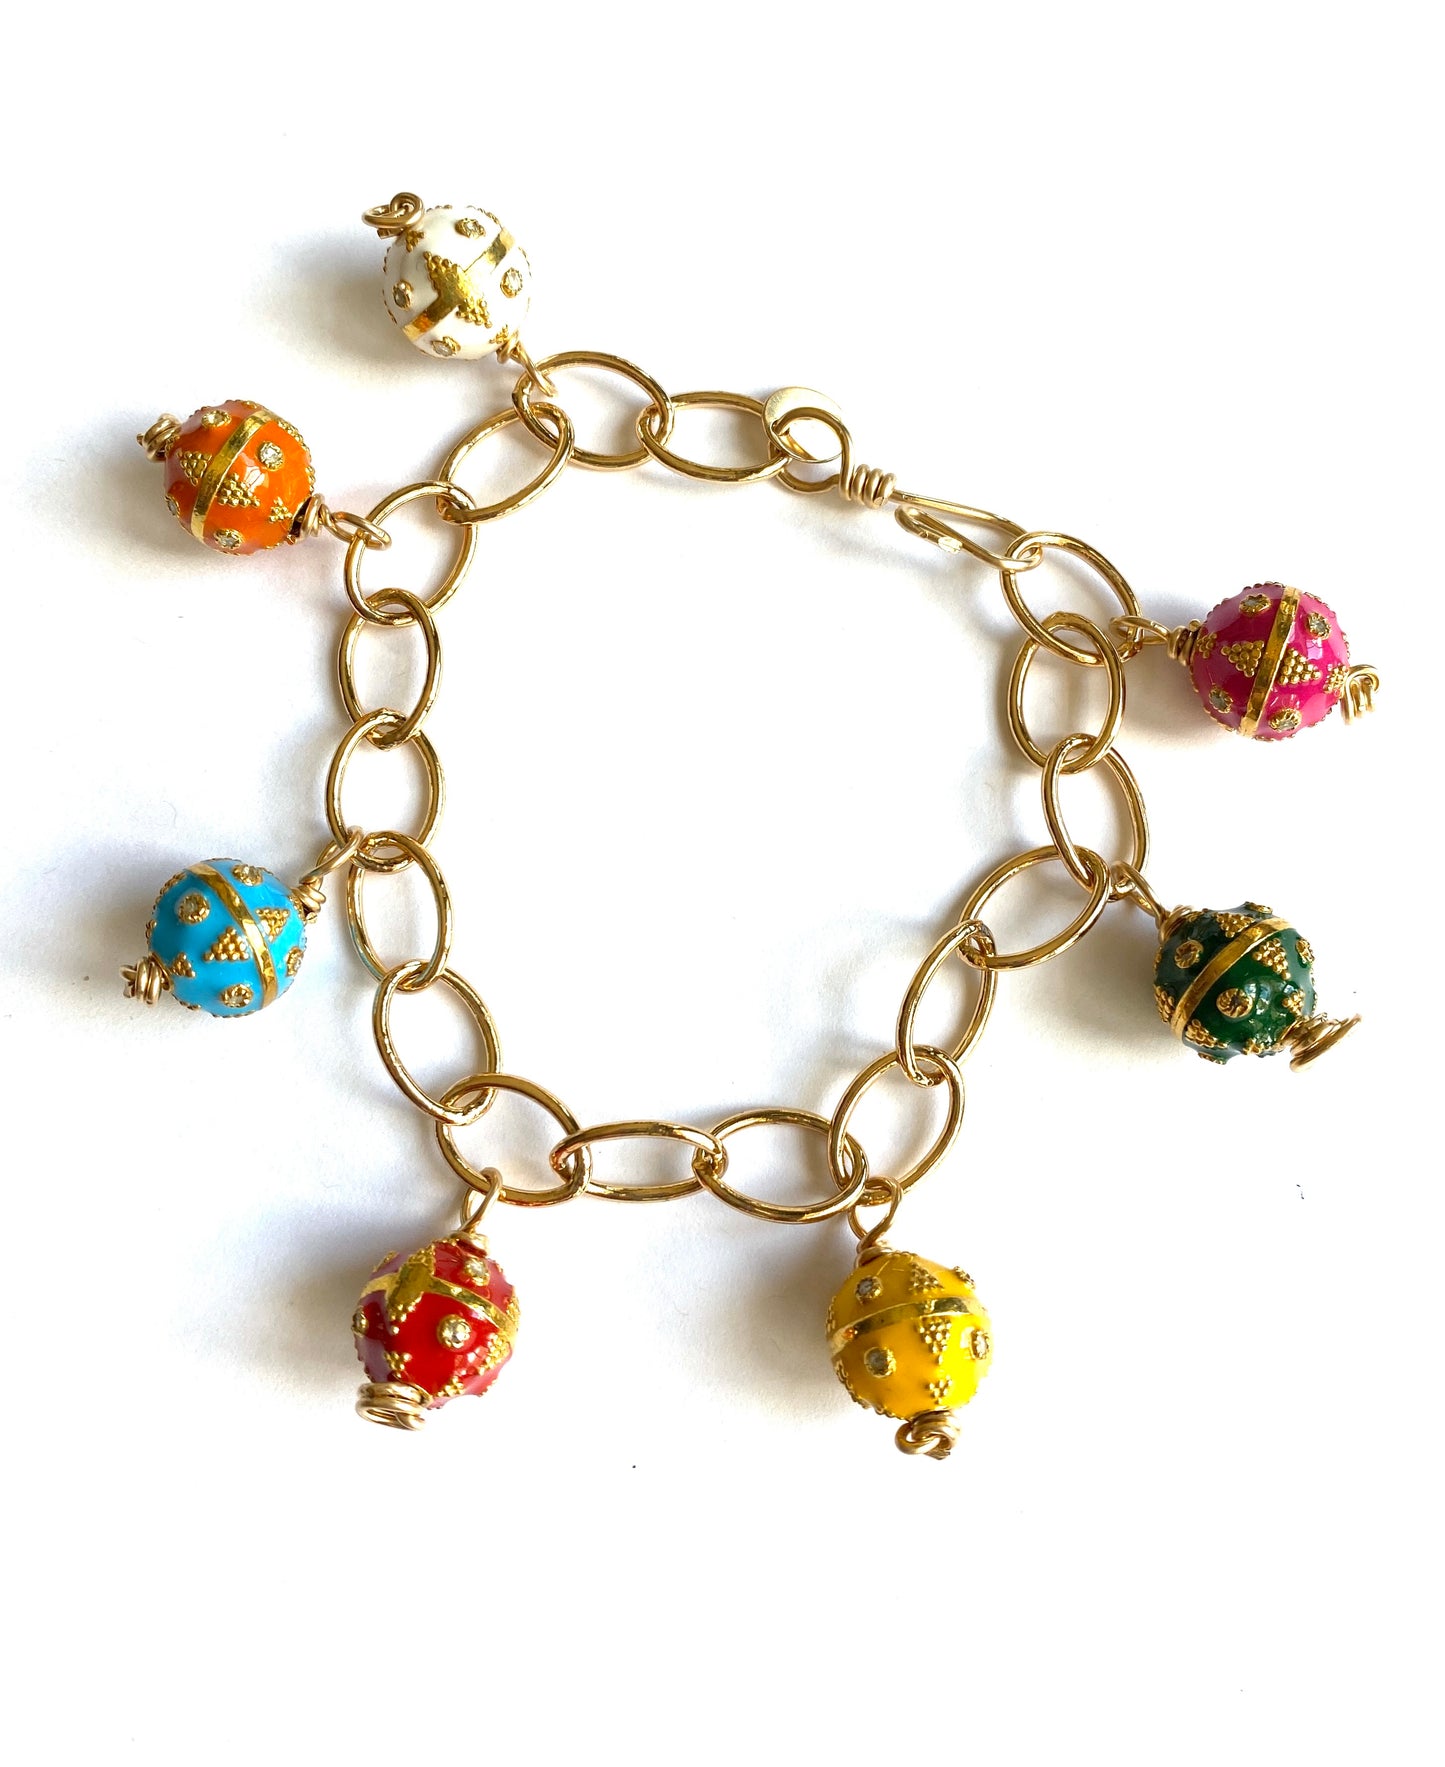 Gold Filled Chain Bracelet With Enamel and Diamond 12mm Beads